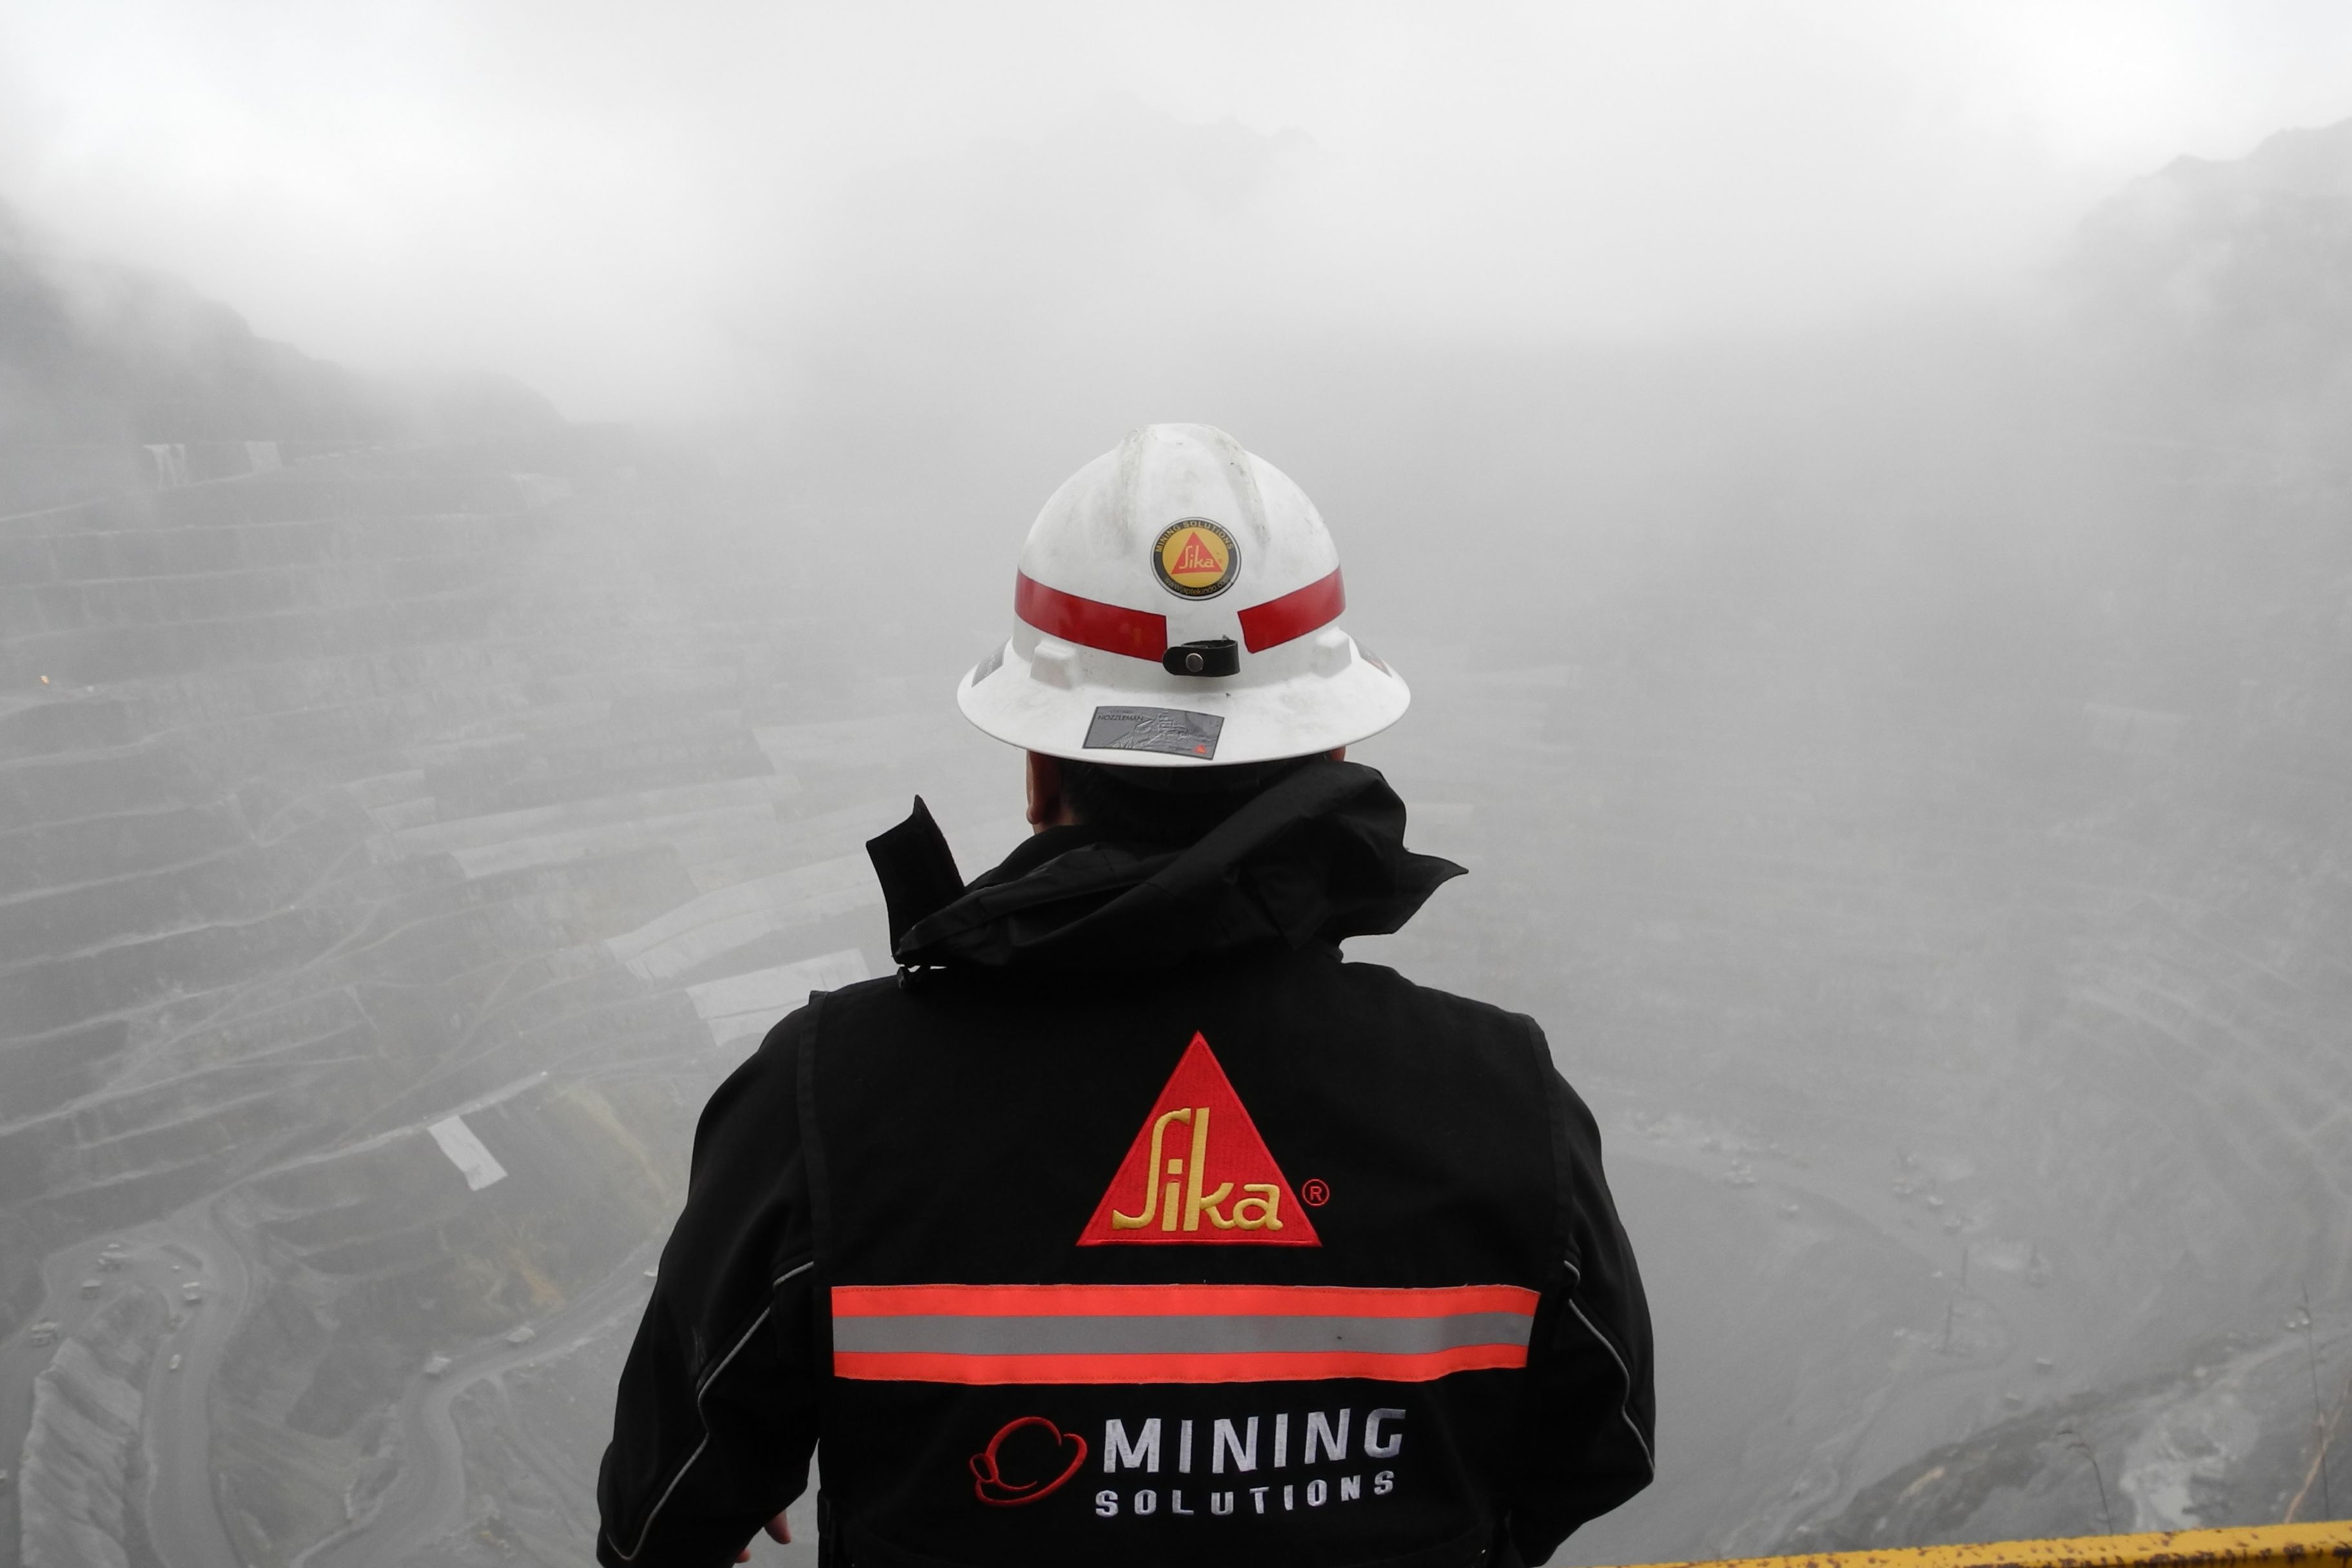 Sika worker looking at the Grasberg Copper-Gold Mine